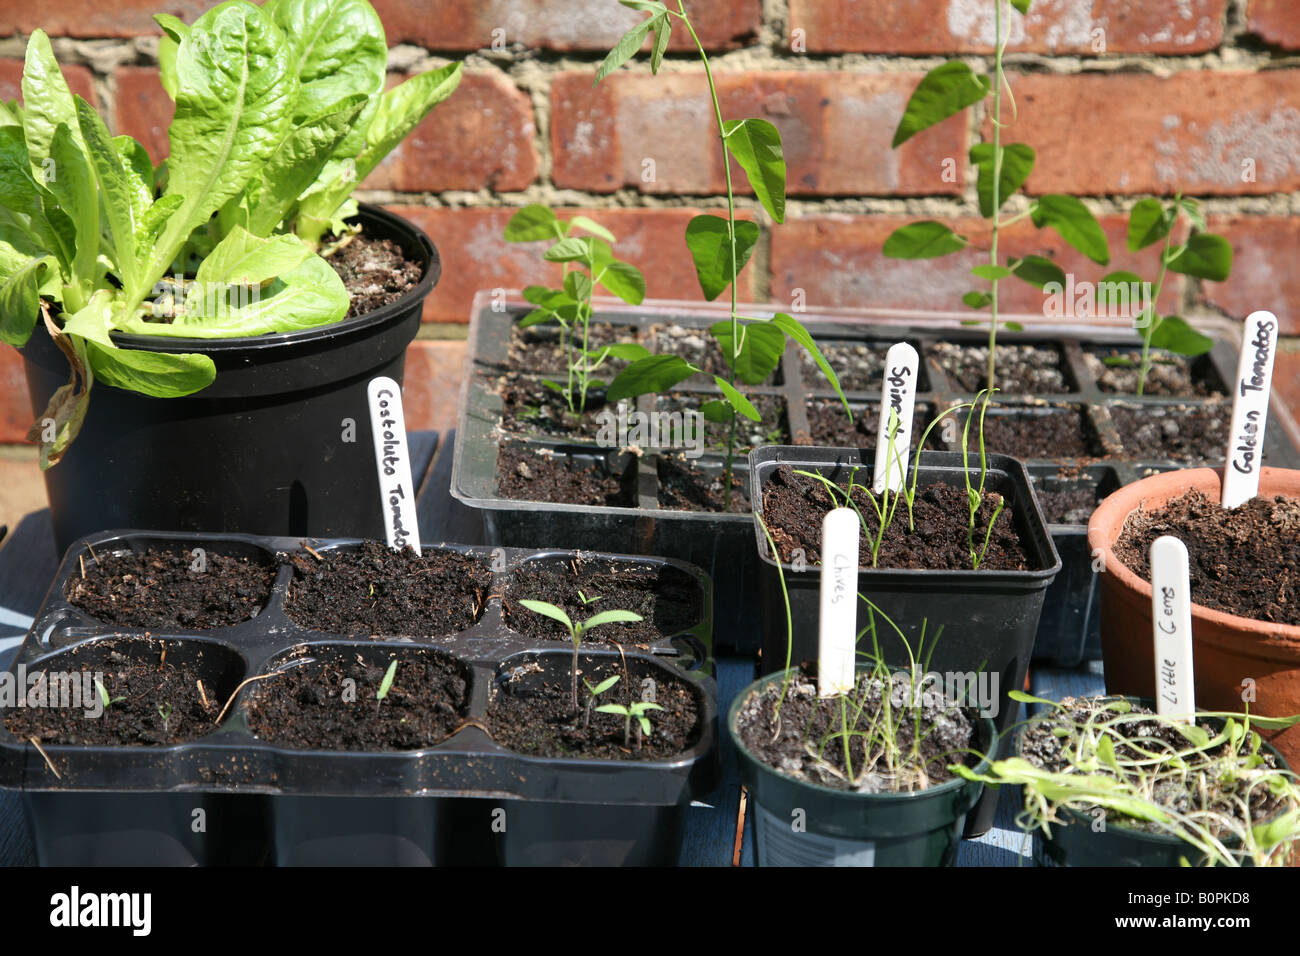 A picture of trays containers and pots of vegetables salad herbs being grown in the garden lettuce chives tomatoes spinach herbs Stock Photo